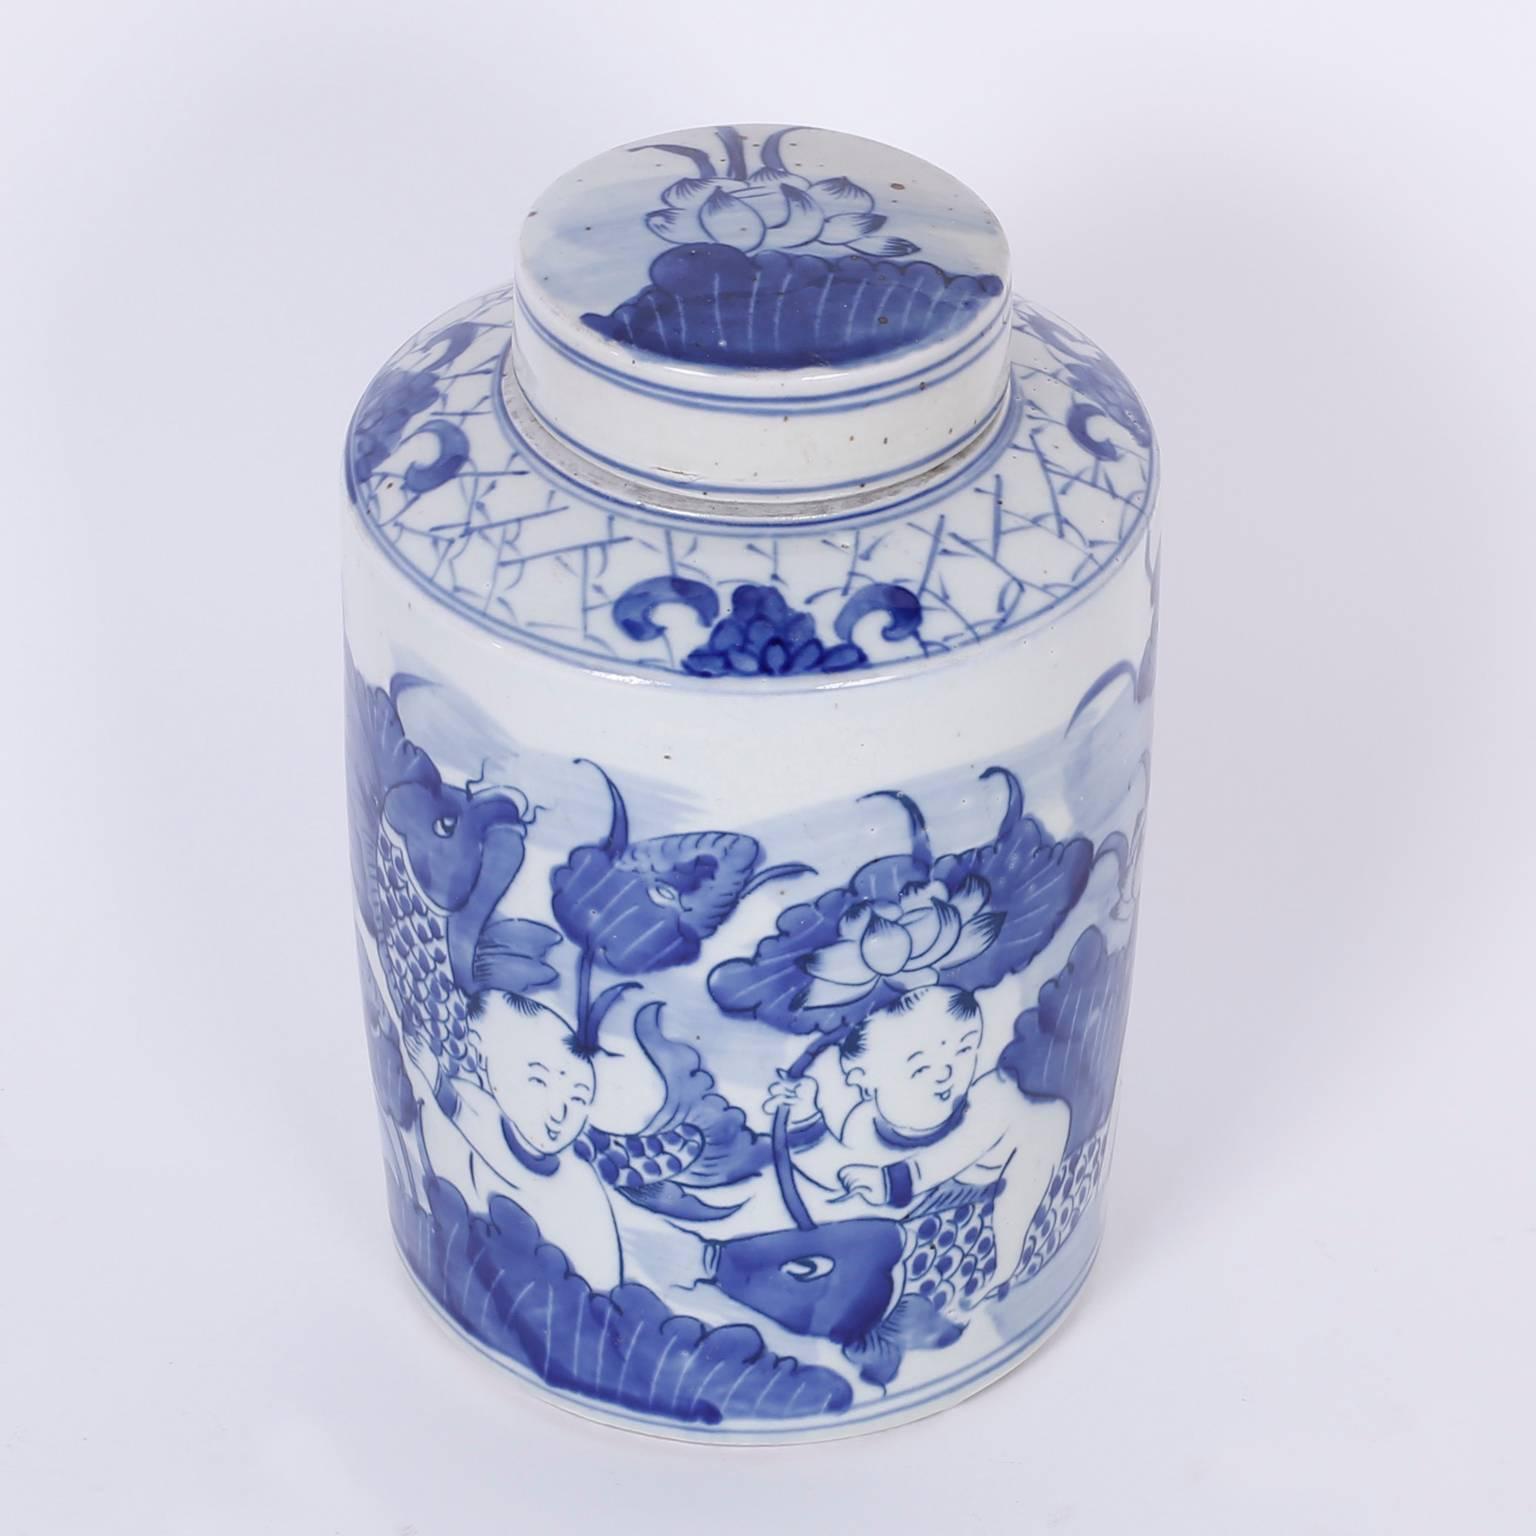 Contemporary Pair of Chinese Blue and White Porcelain Lidded Jars